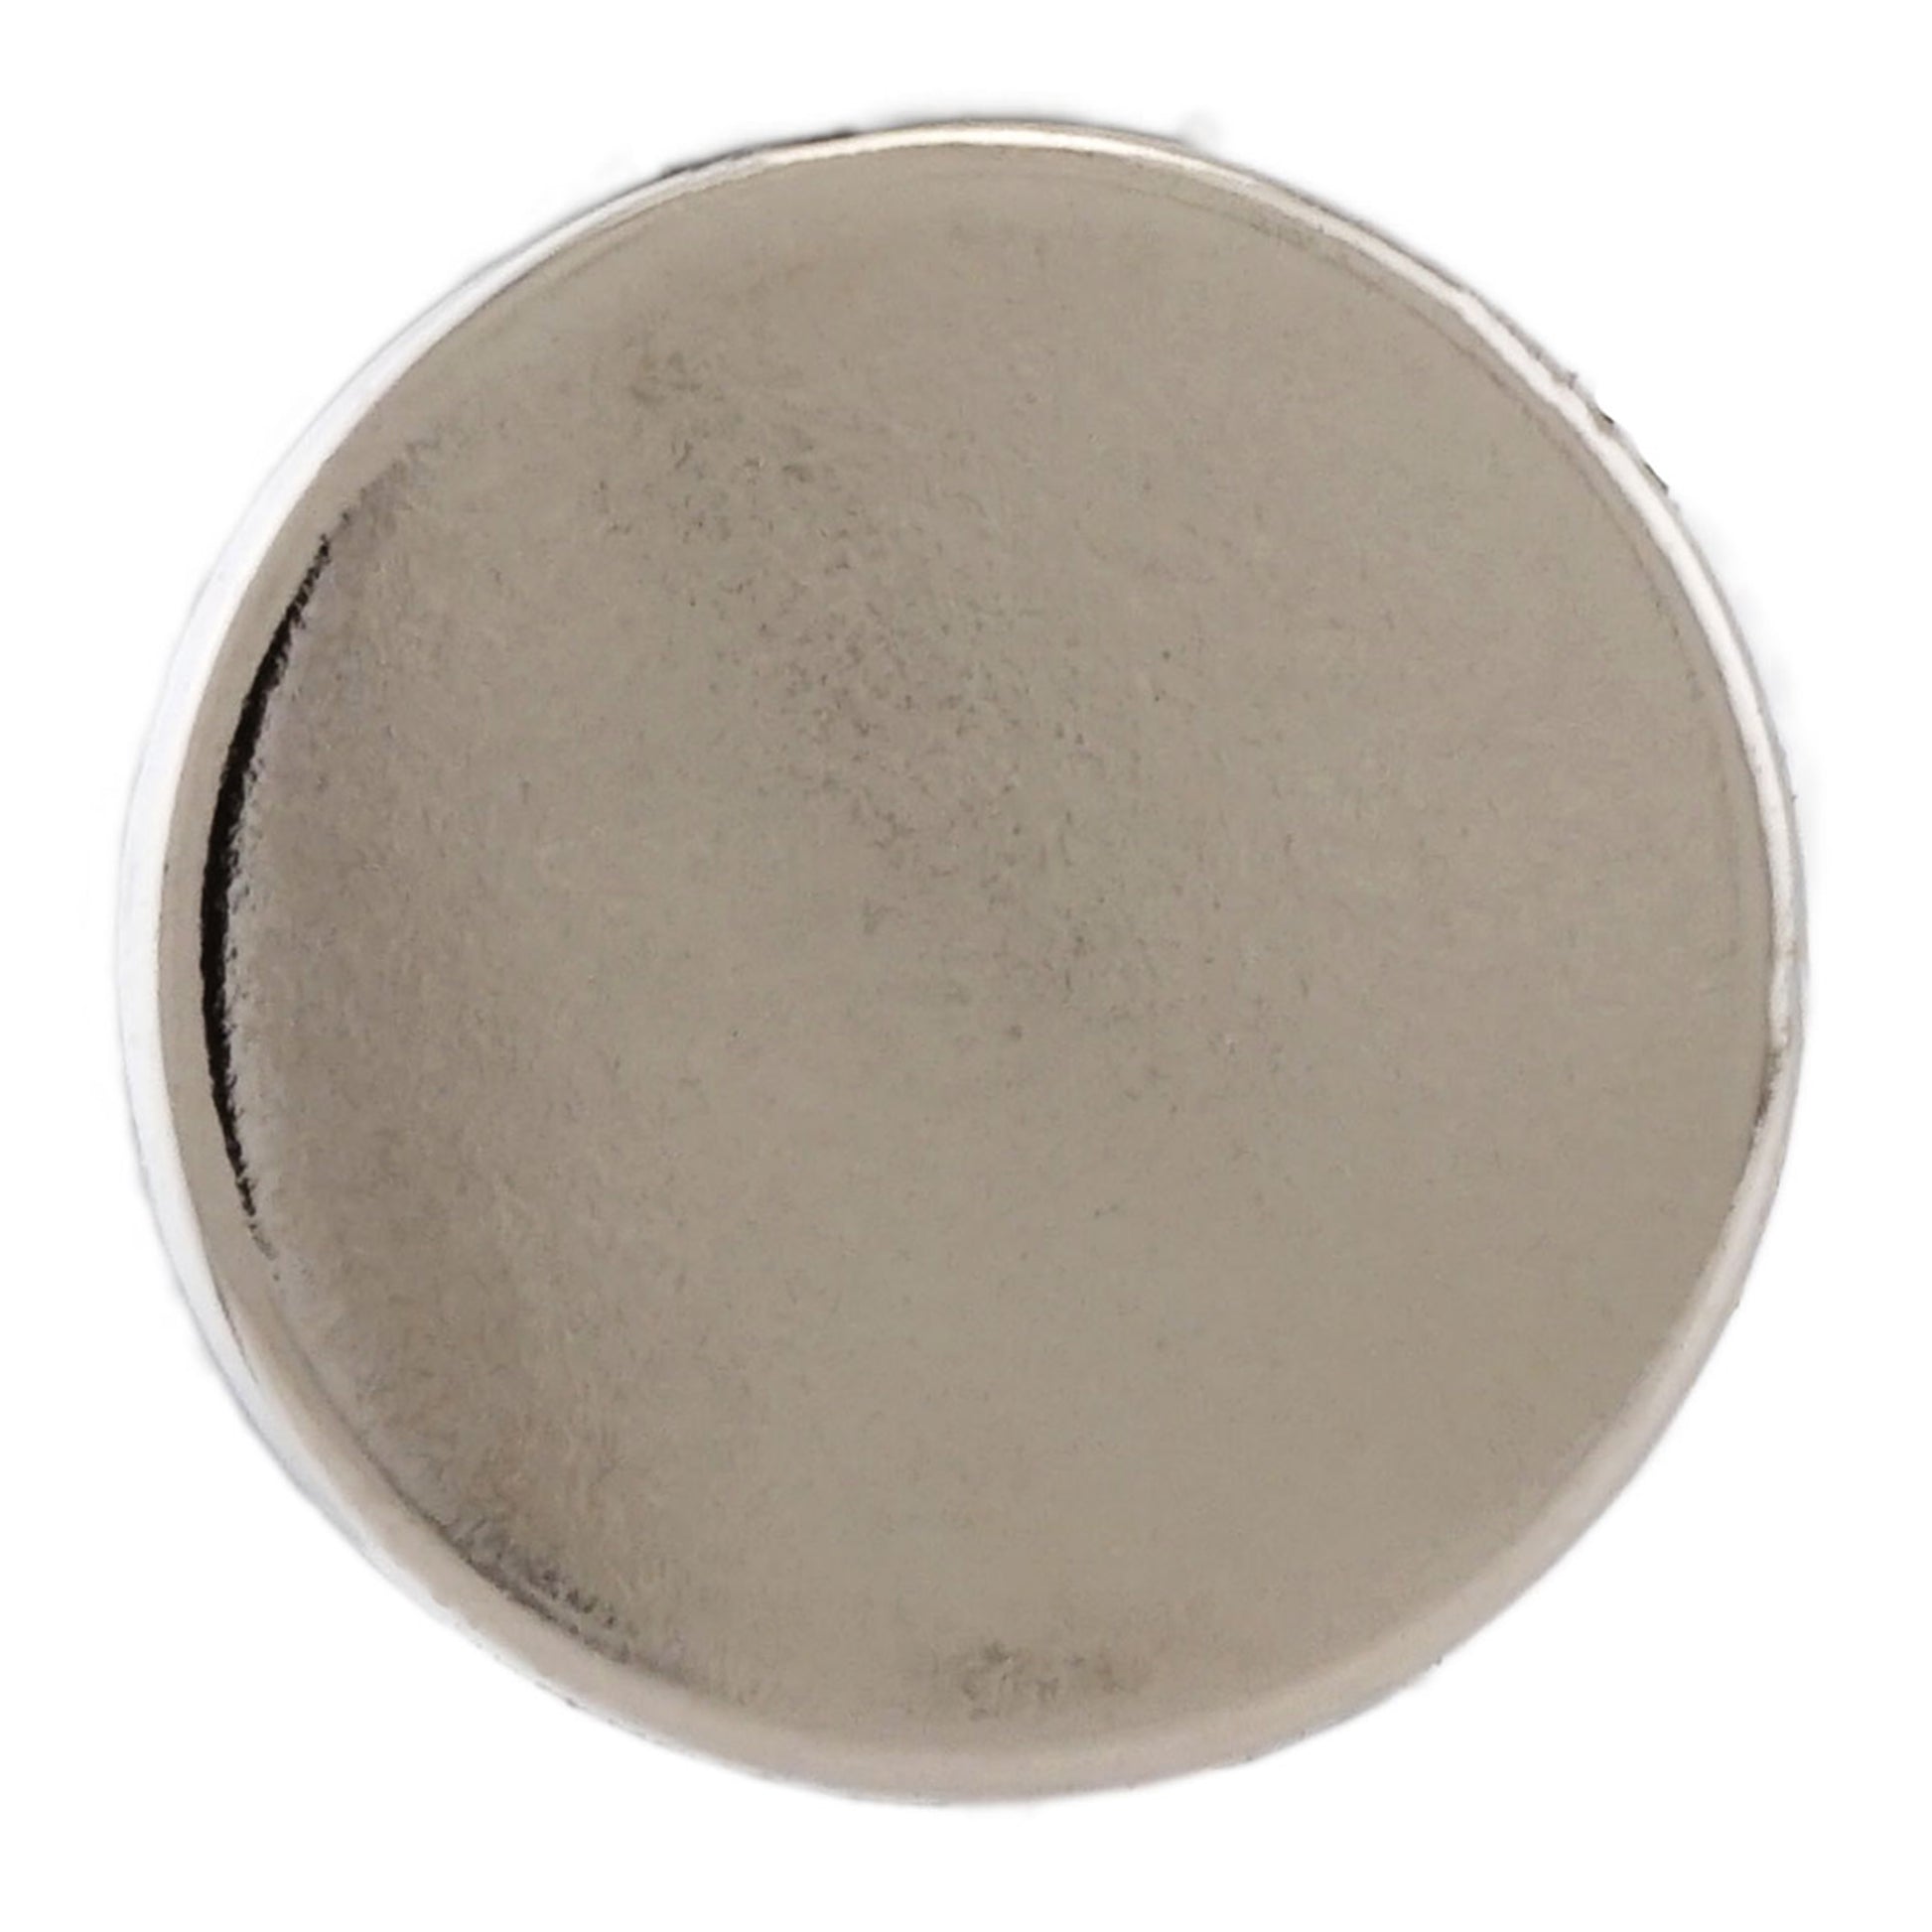 Load image into Gallery viewer, ND008102N Neodymium Disc Magnet - Top View